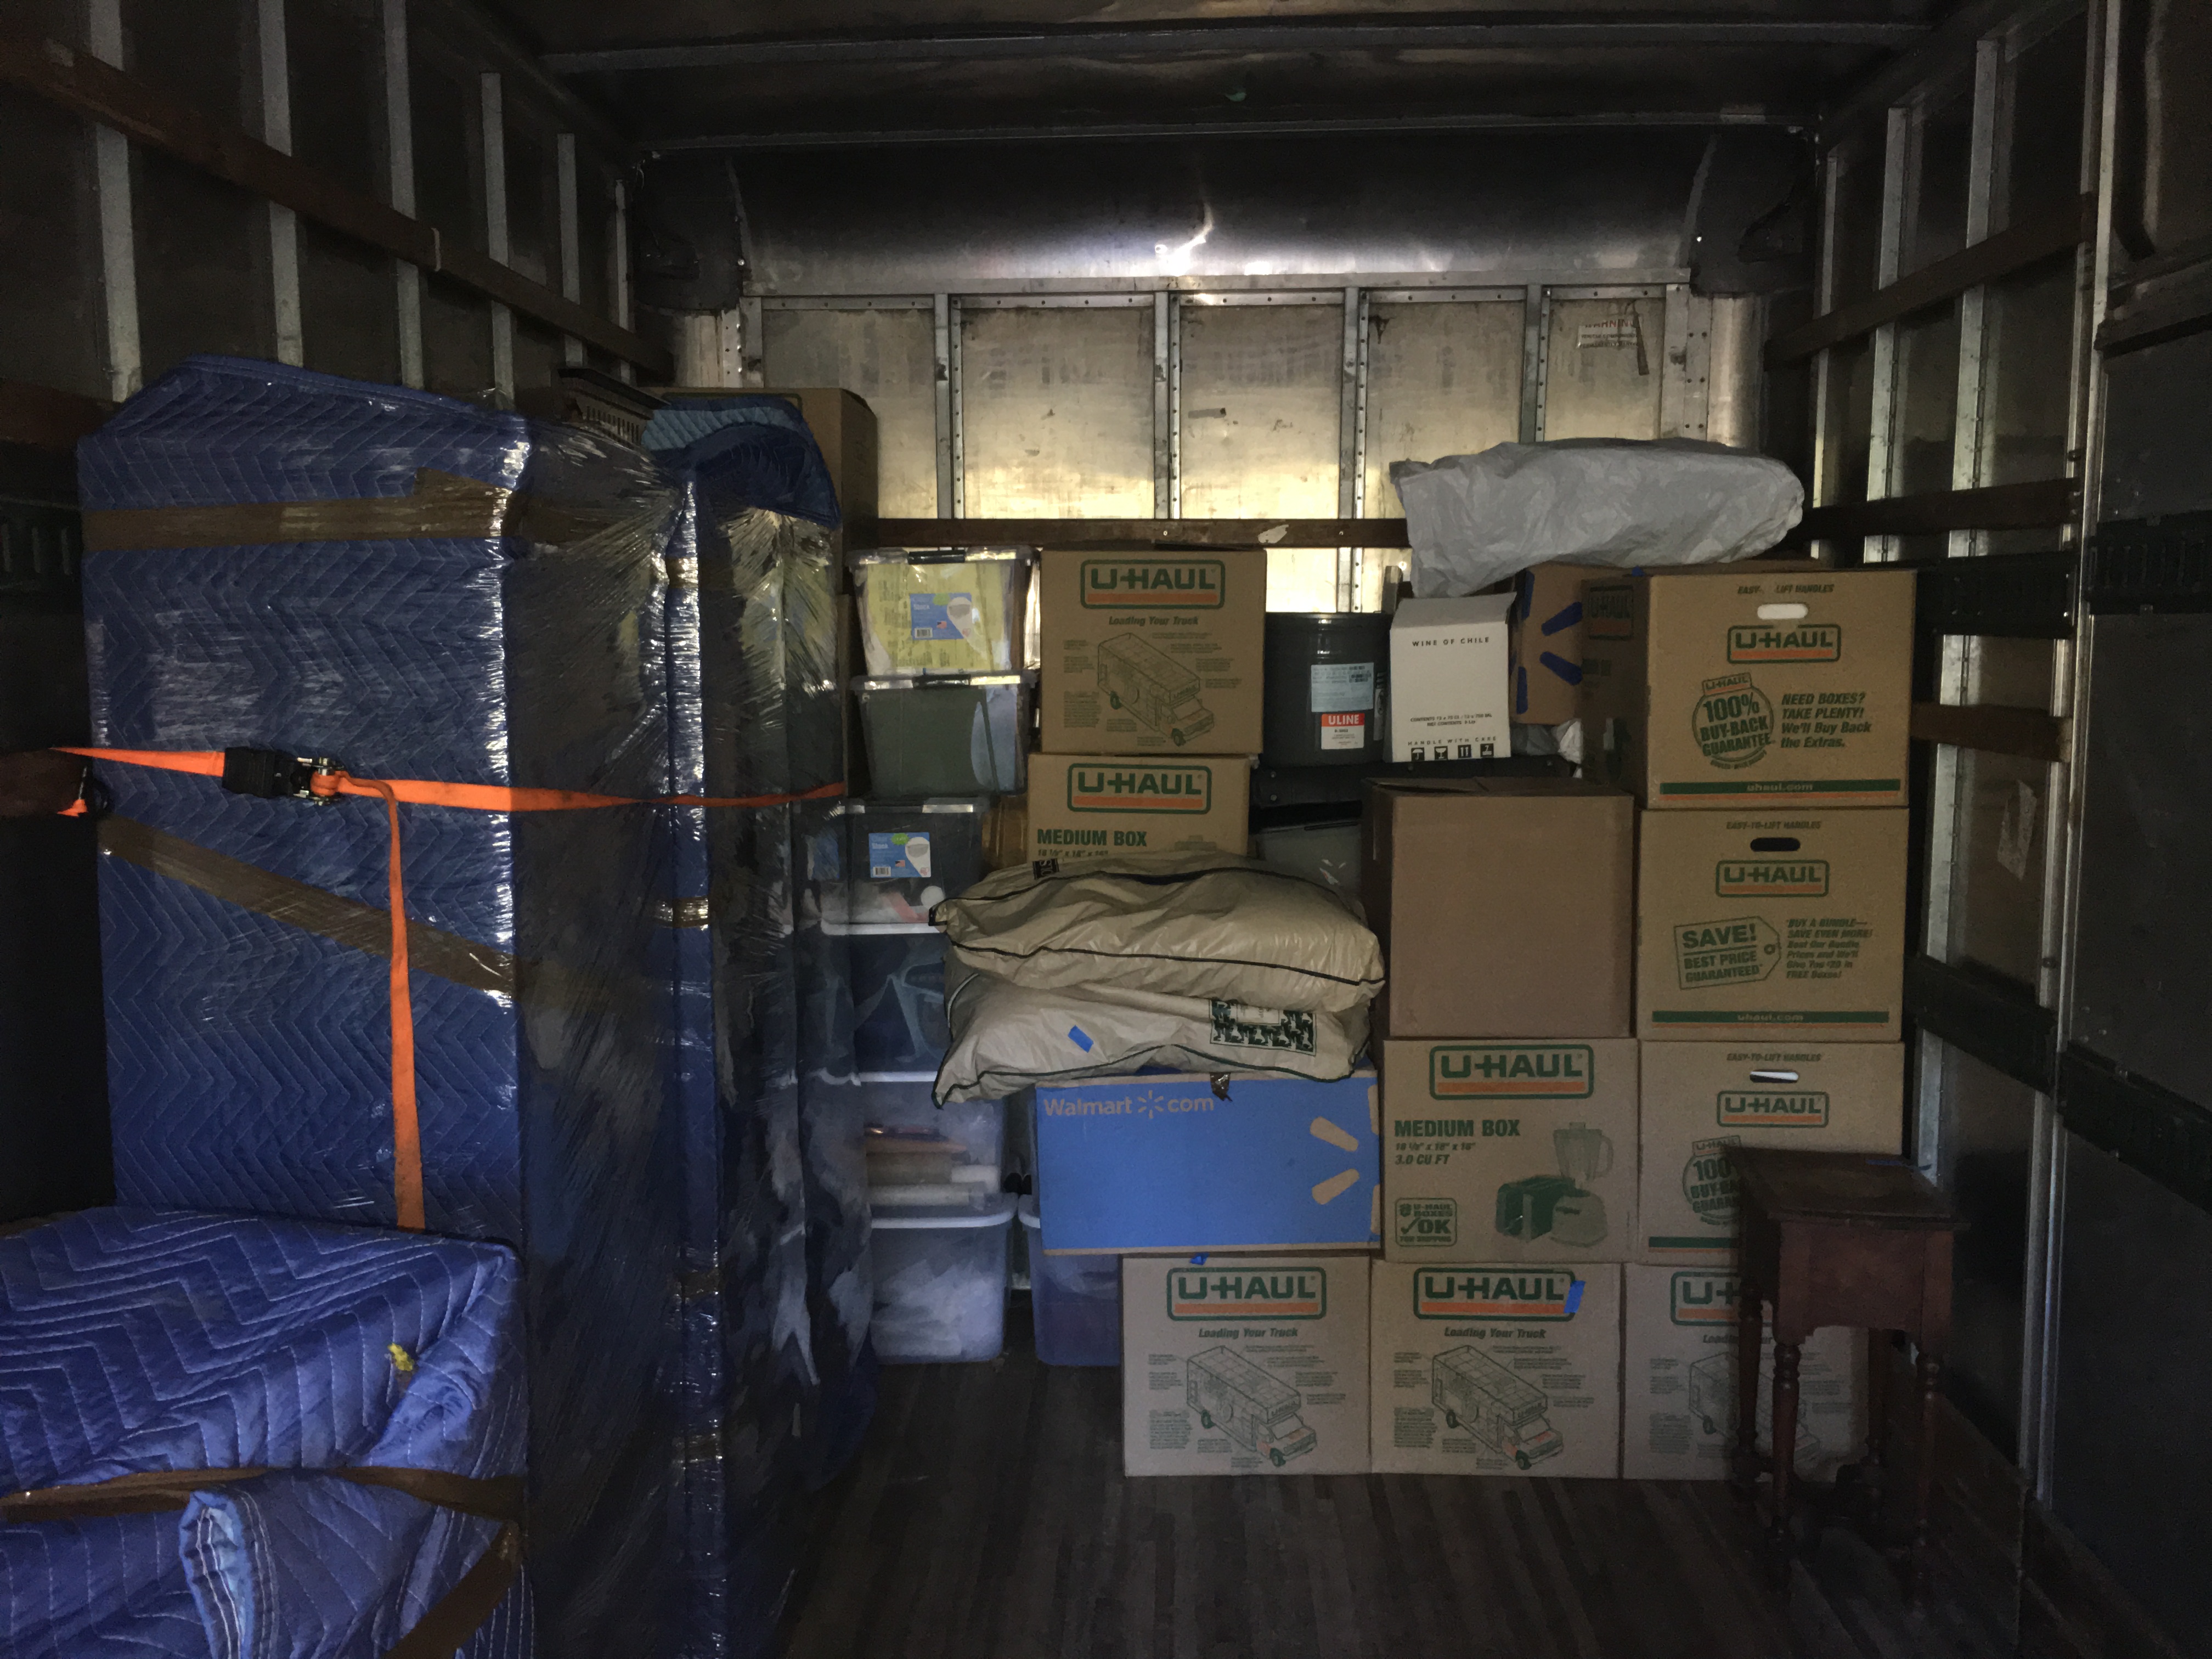 Boxes and furniture stocked in truck during move.